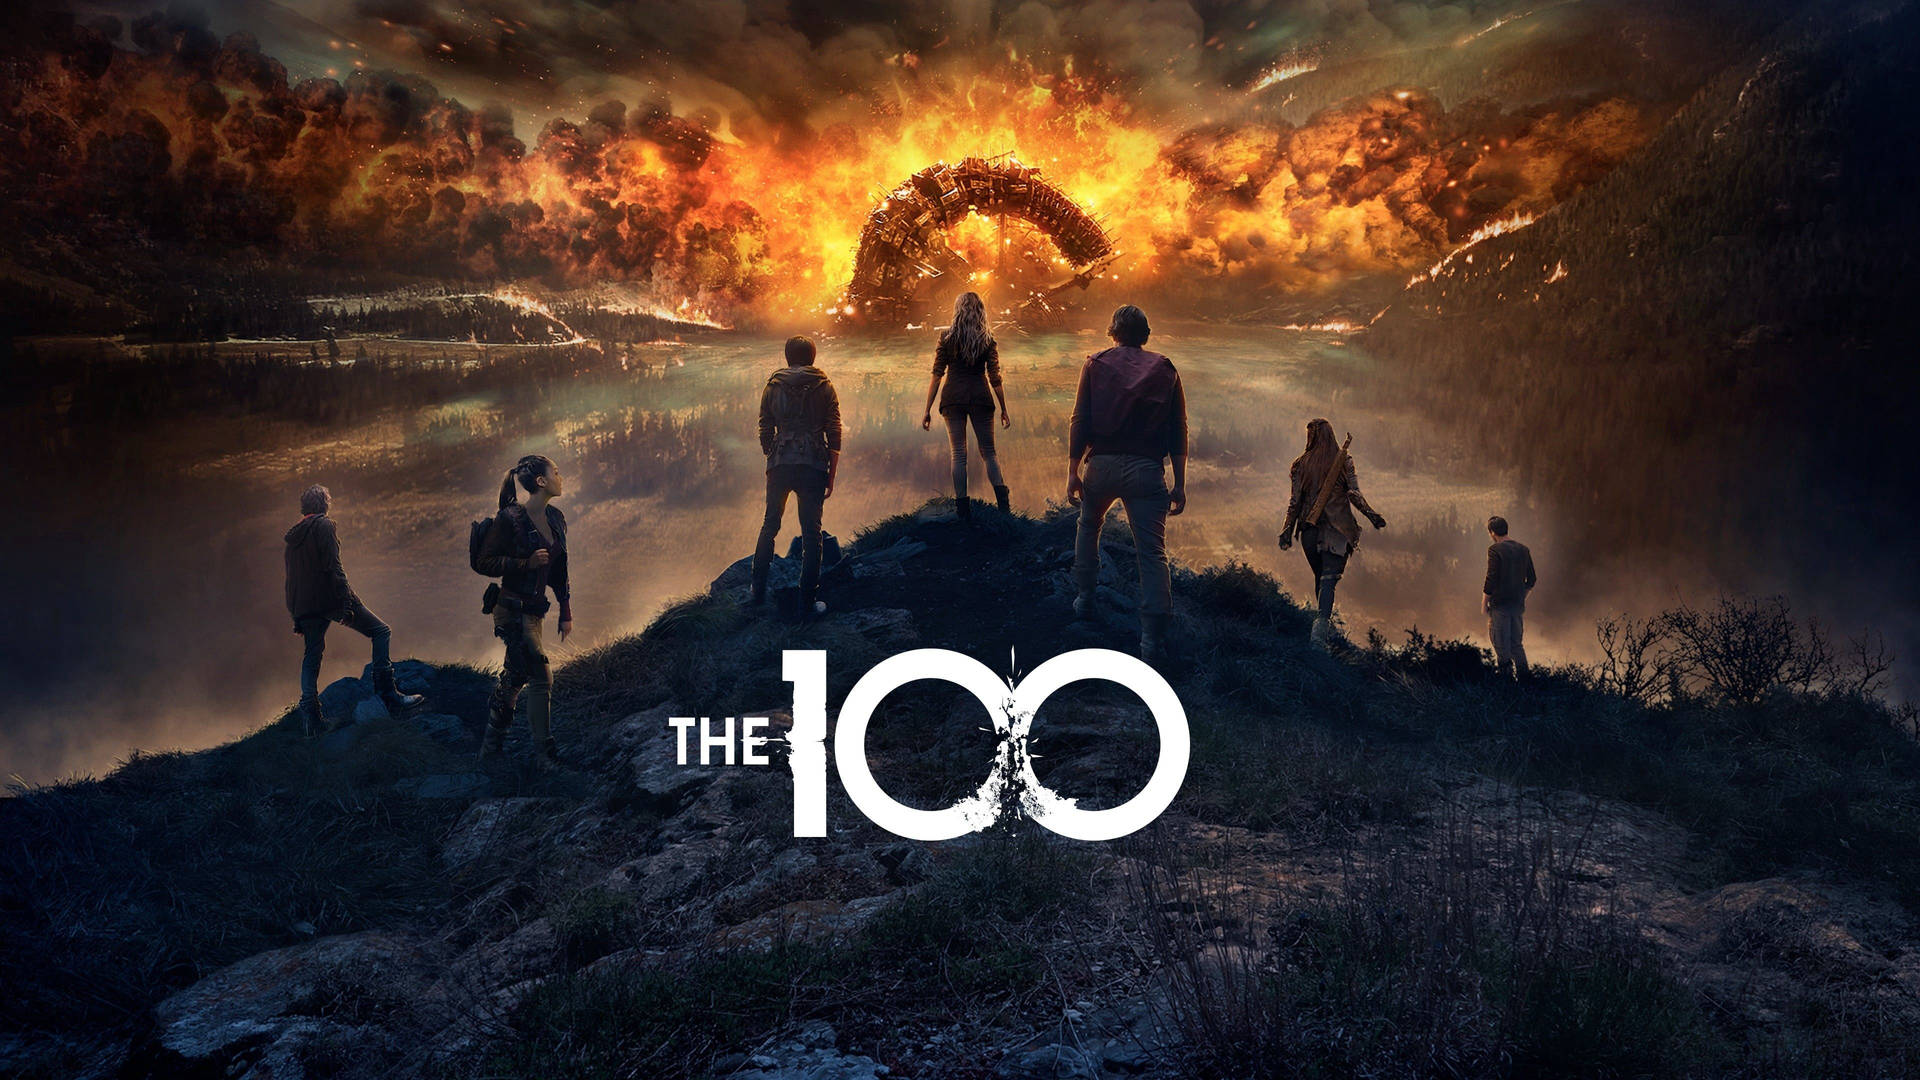 The 100 Background Wallpaper